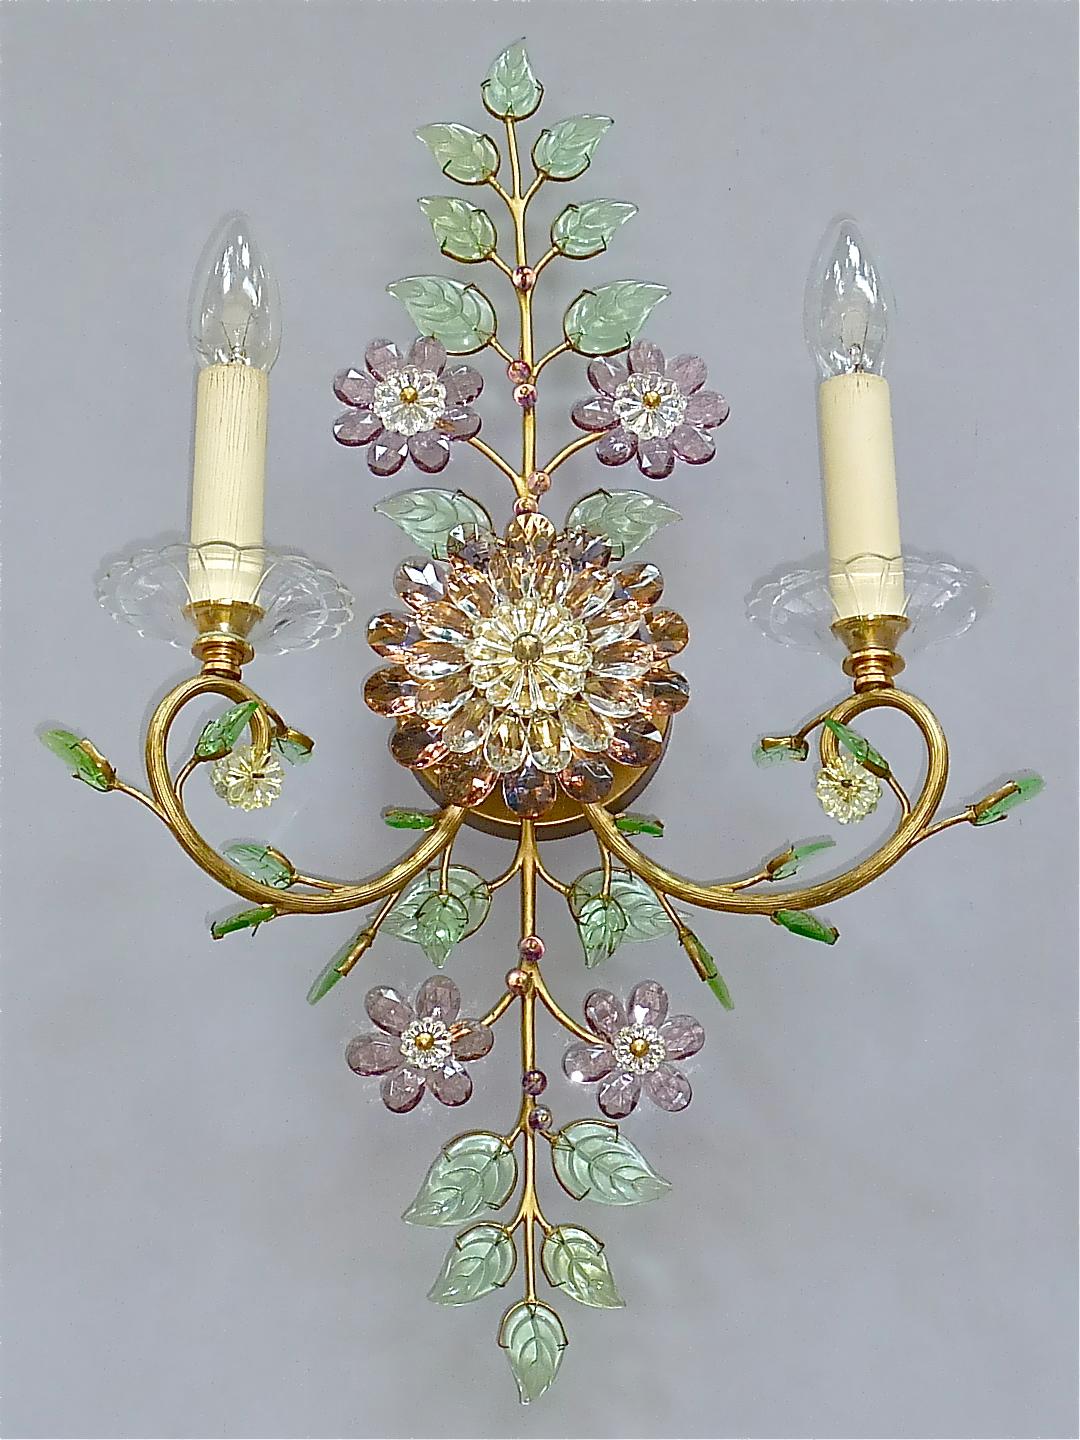 Large pair of gilt brass metal crystal glass floral leaf sconces or wall appliques made by high class lighting company Palwa, Germany, circa 1950s to 1960s, documented in the Palwa sales catalog, signed with company label on reverse and often